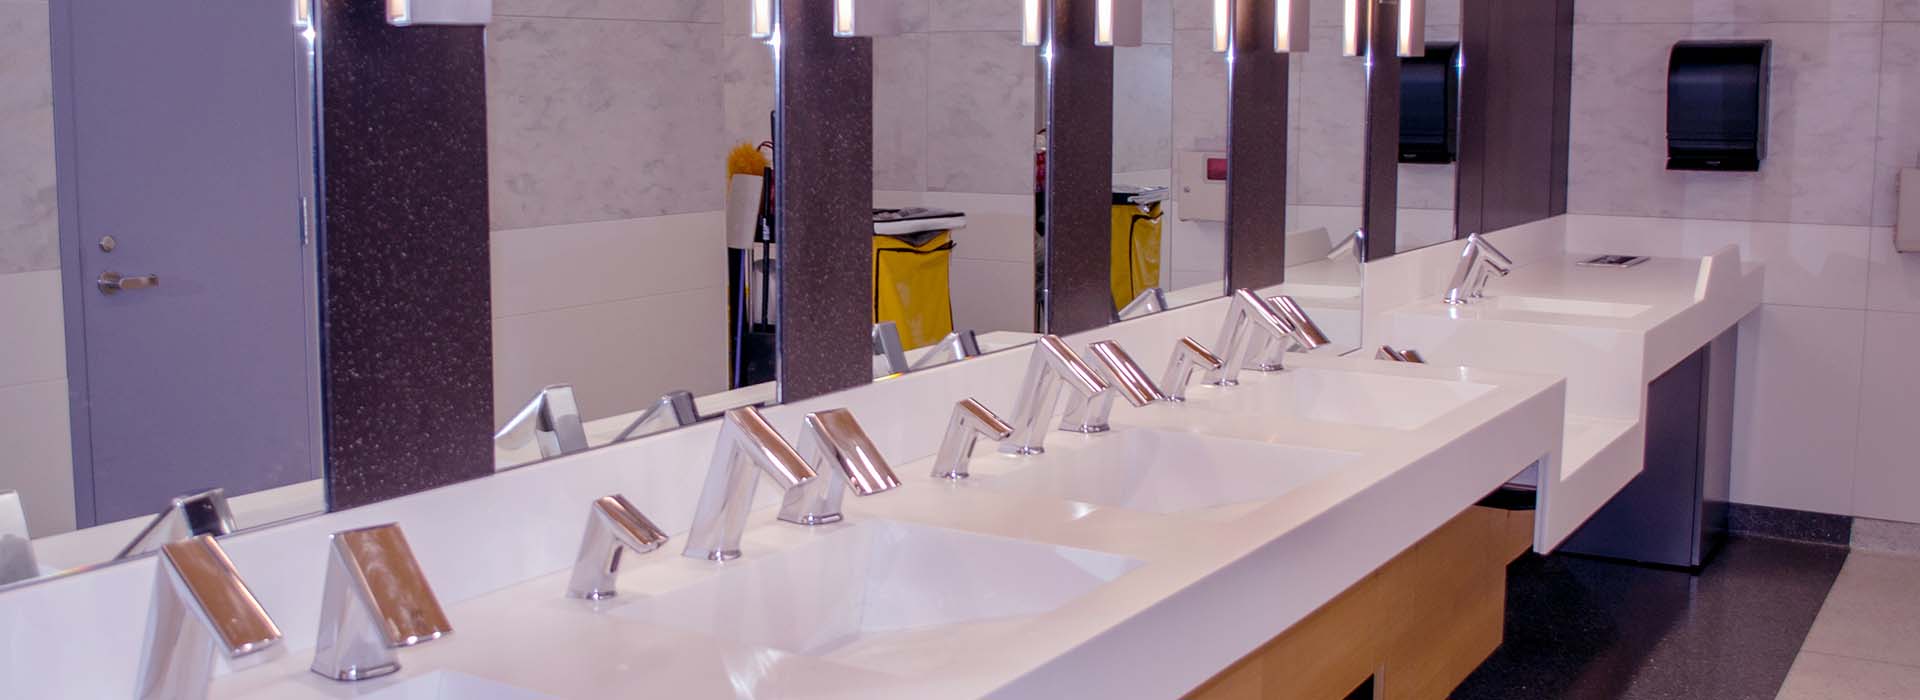 Cleaning Services, Janitorial Services and Commercial Cleaning Services